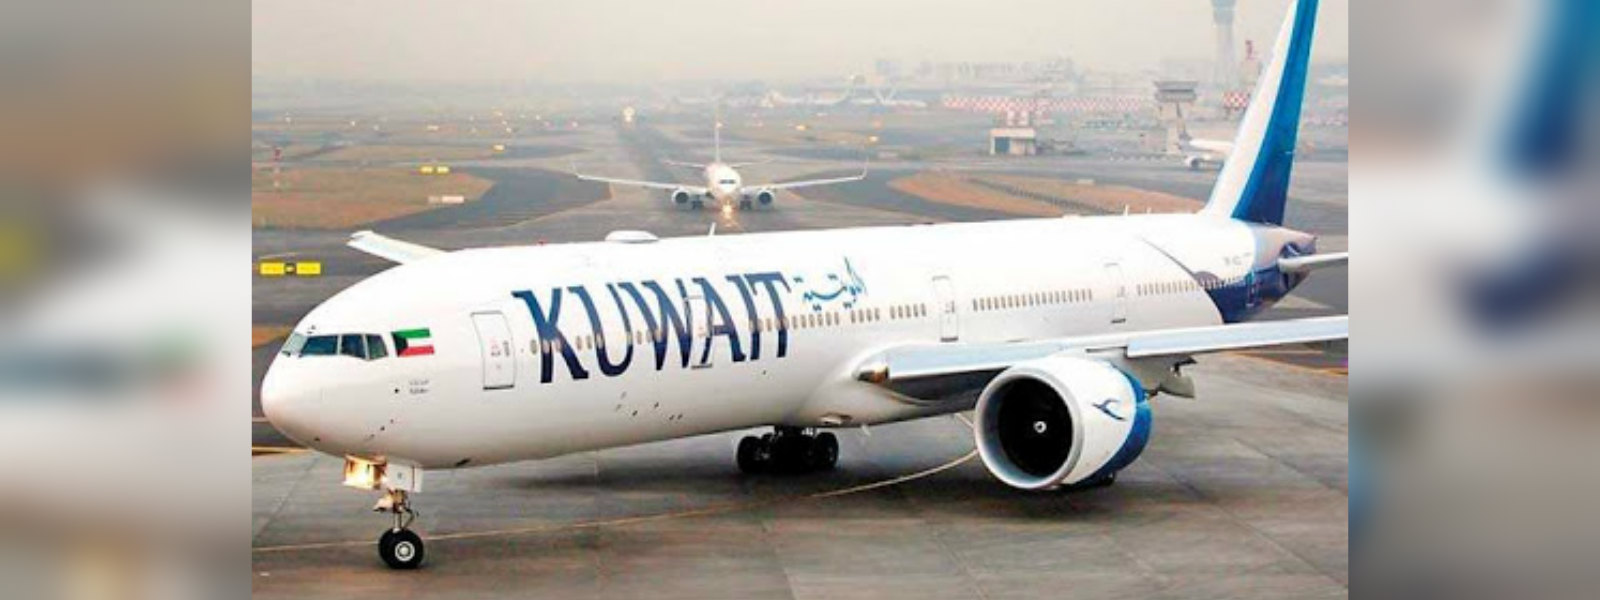 Corona outbreak: Kuwait suspends flights to seven countries